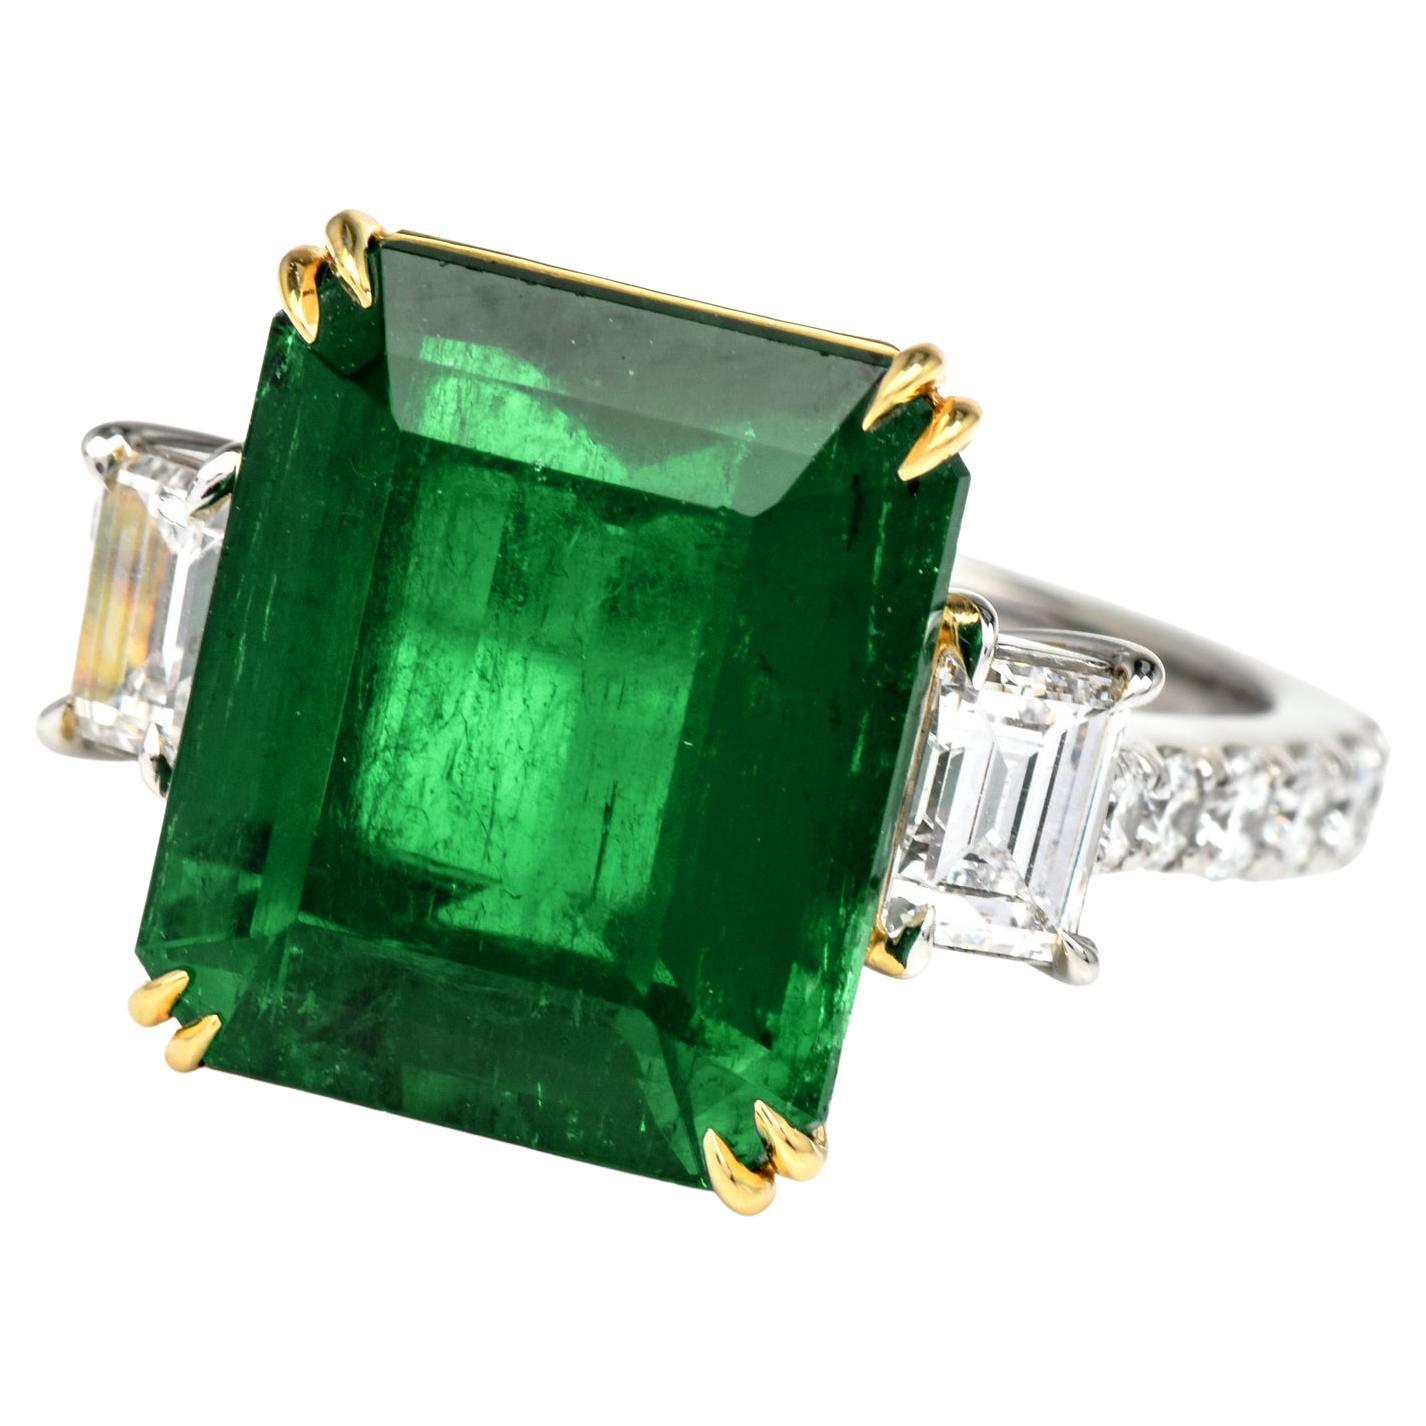 Treat yourself to this irresistibly stunning Diamond 8.64 carat Colombian Emerald 18K Gold Large Cocktail Ring! 

Crafted in platinum and 18K white gold, the center Deep Green Rare Colombian Emerald of approximately 7.24 carats, emerald-cut,